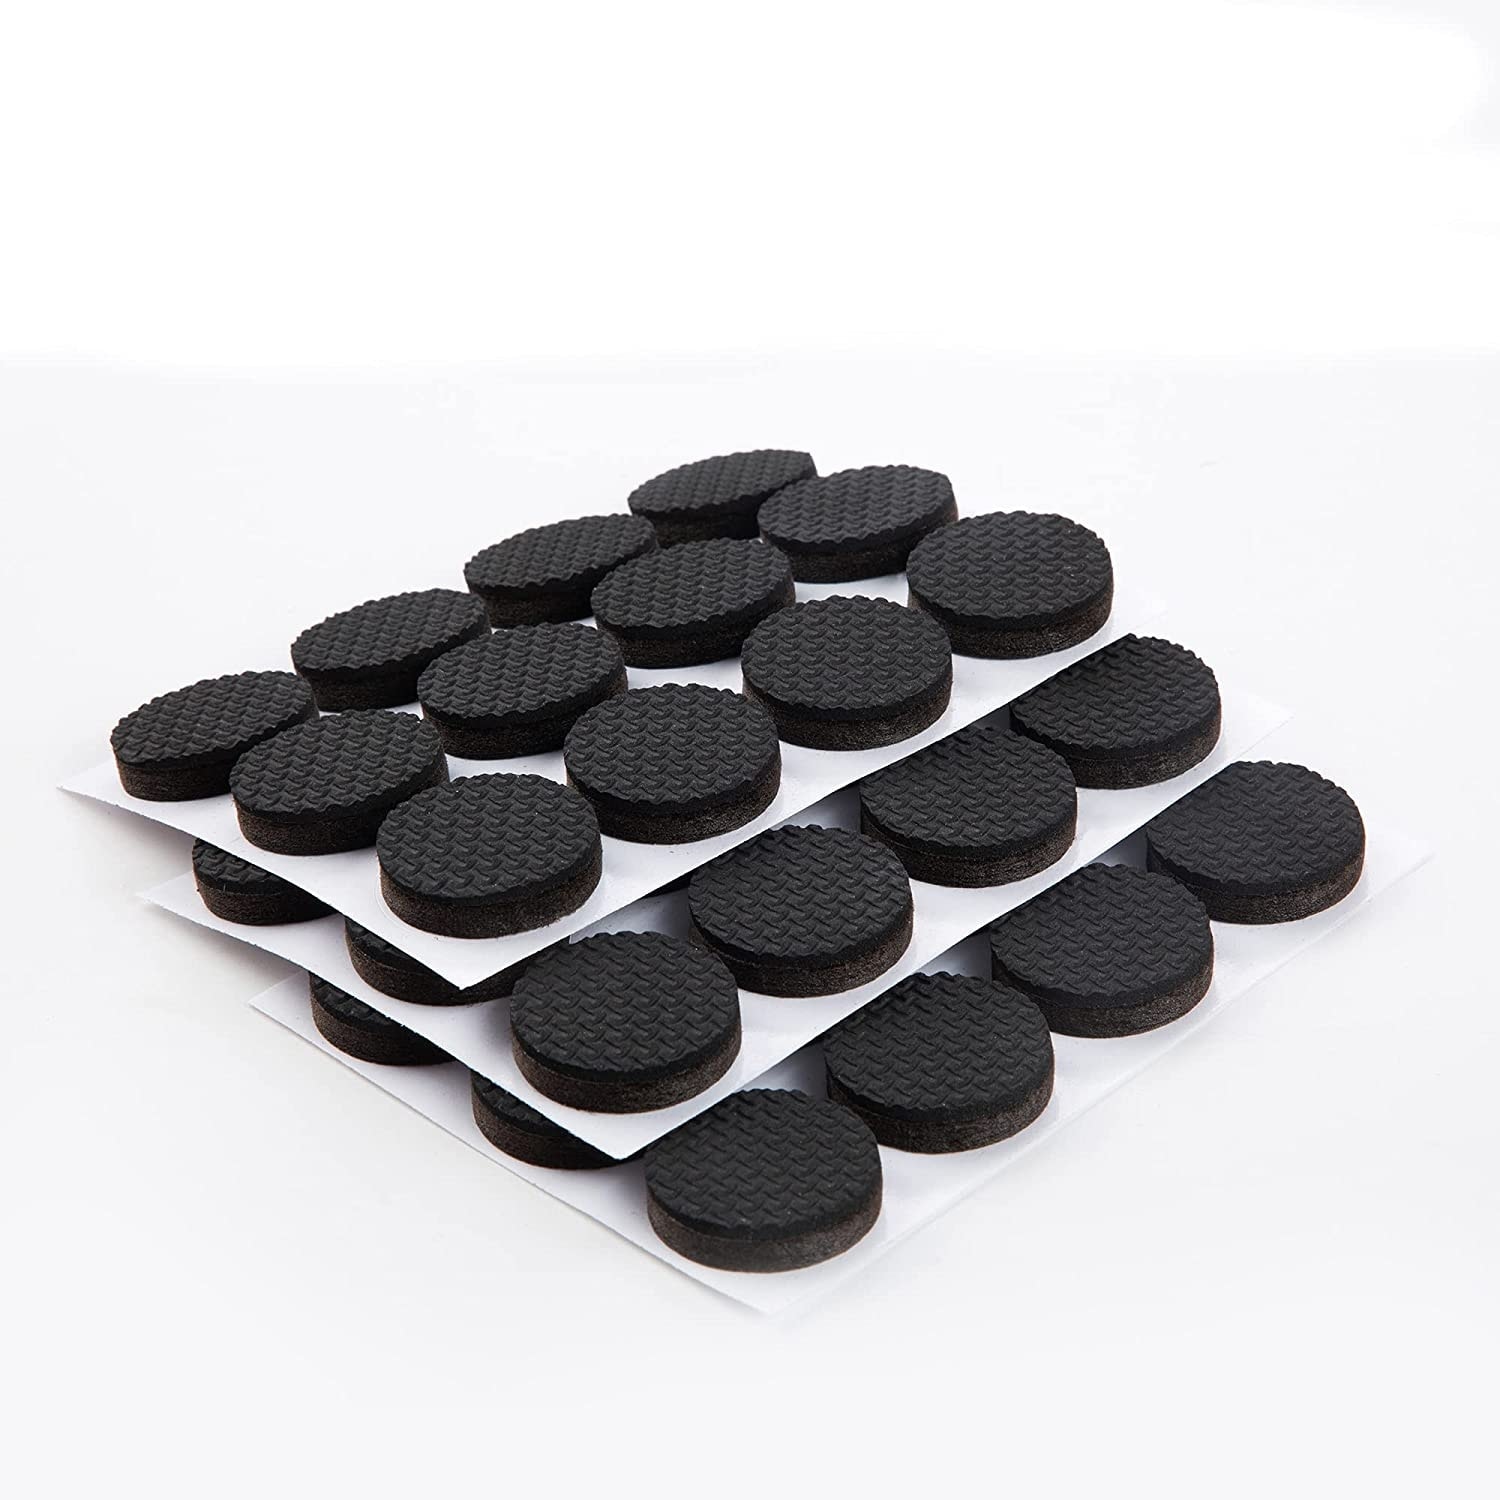 Non Slip Furniture Pads Premium 24 Pcs 3 Furniture Pad! Best Furniture Grippers - Selfadhesive Rubber Feet Couch Stoppers Ideal Furniture Floor